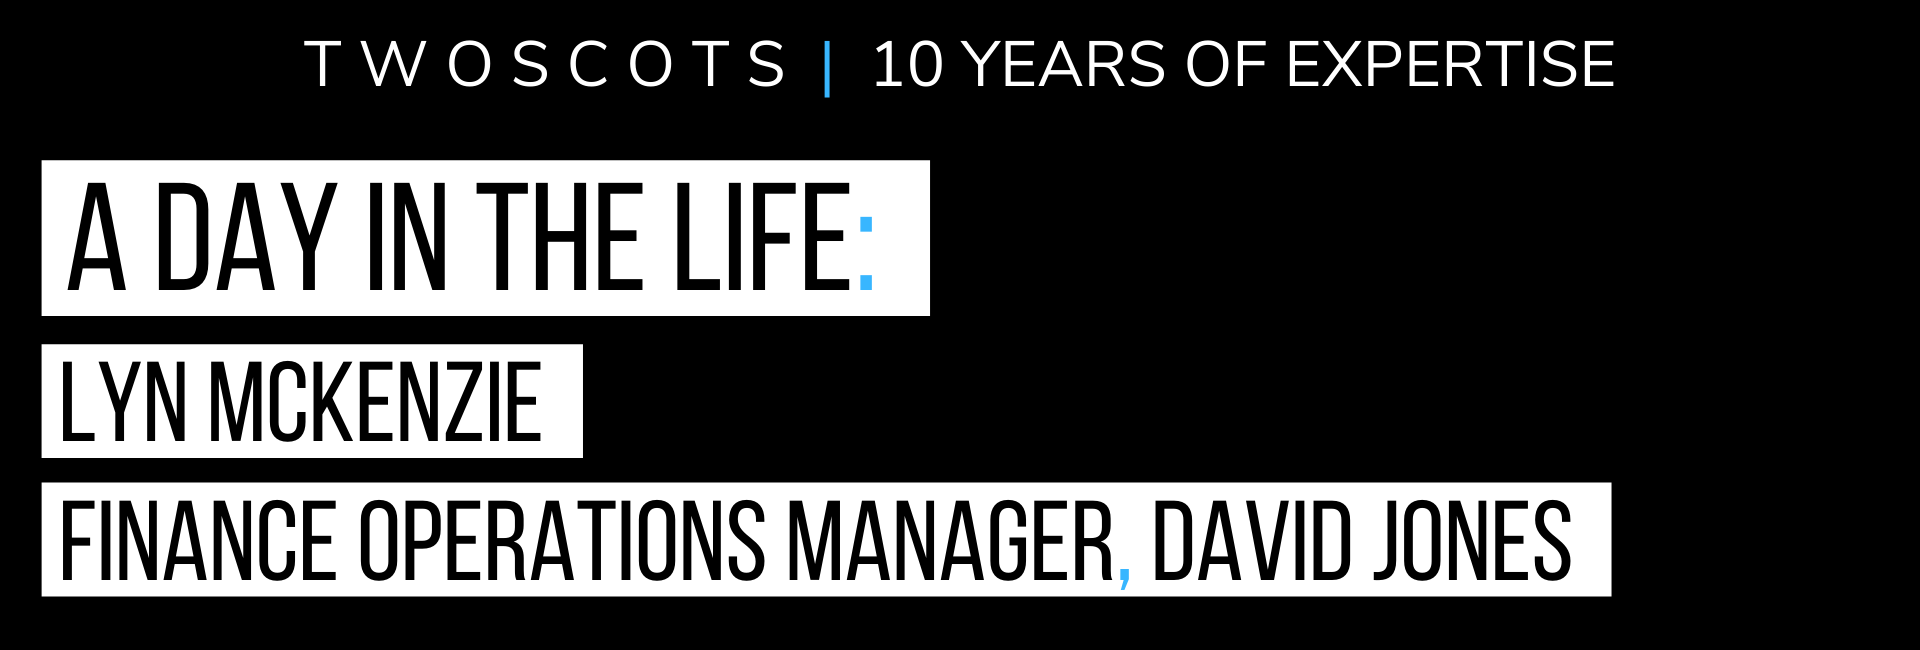 A day in the life: Lyn McKenzie, Finance Operations Manager of David Jones